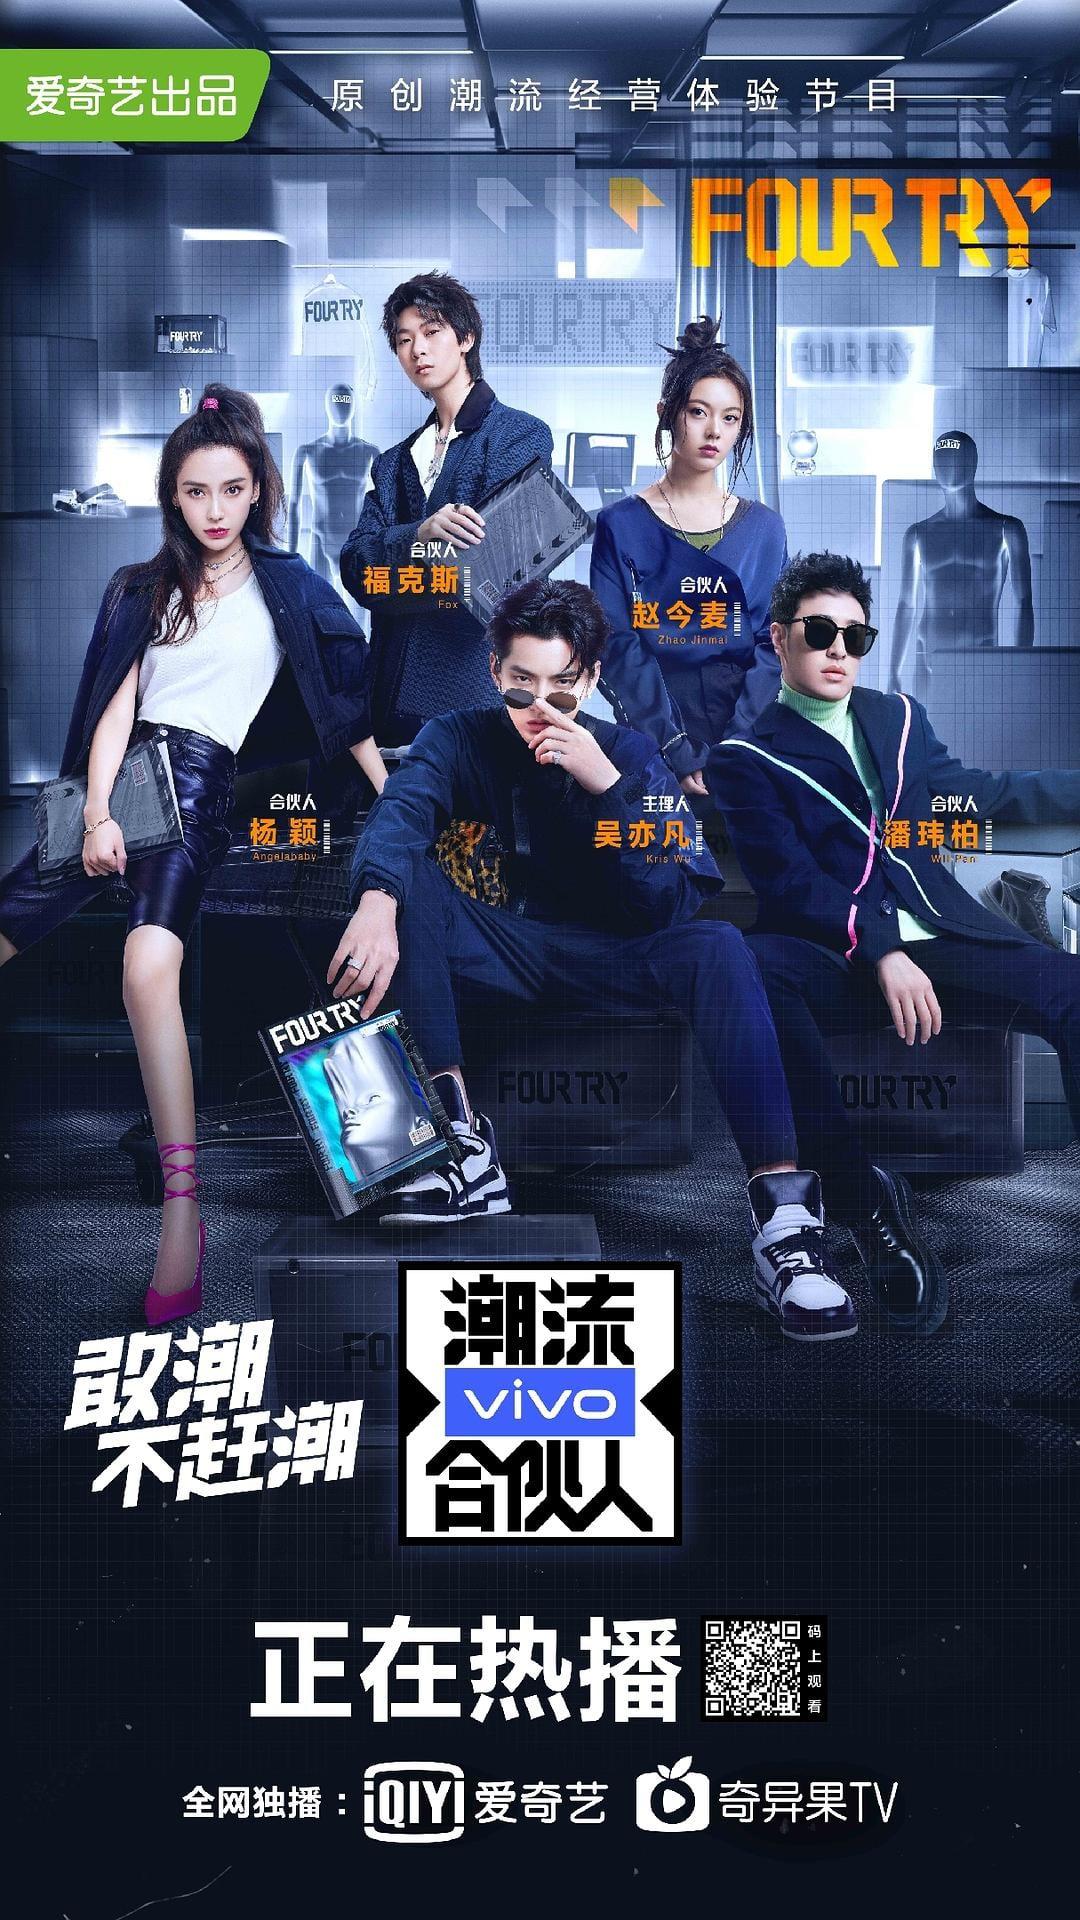 TV ratings for Four Try(潮流合伙人) in Spain. iqiyi TV series